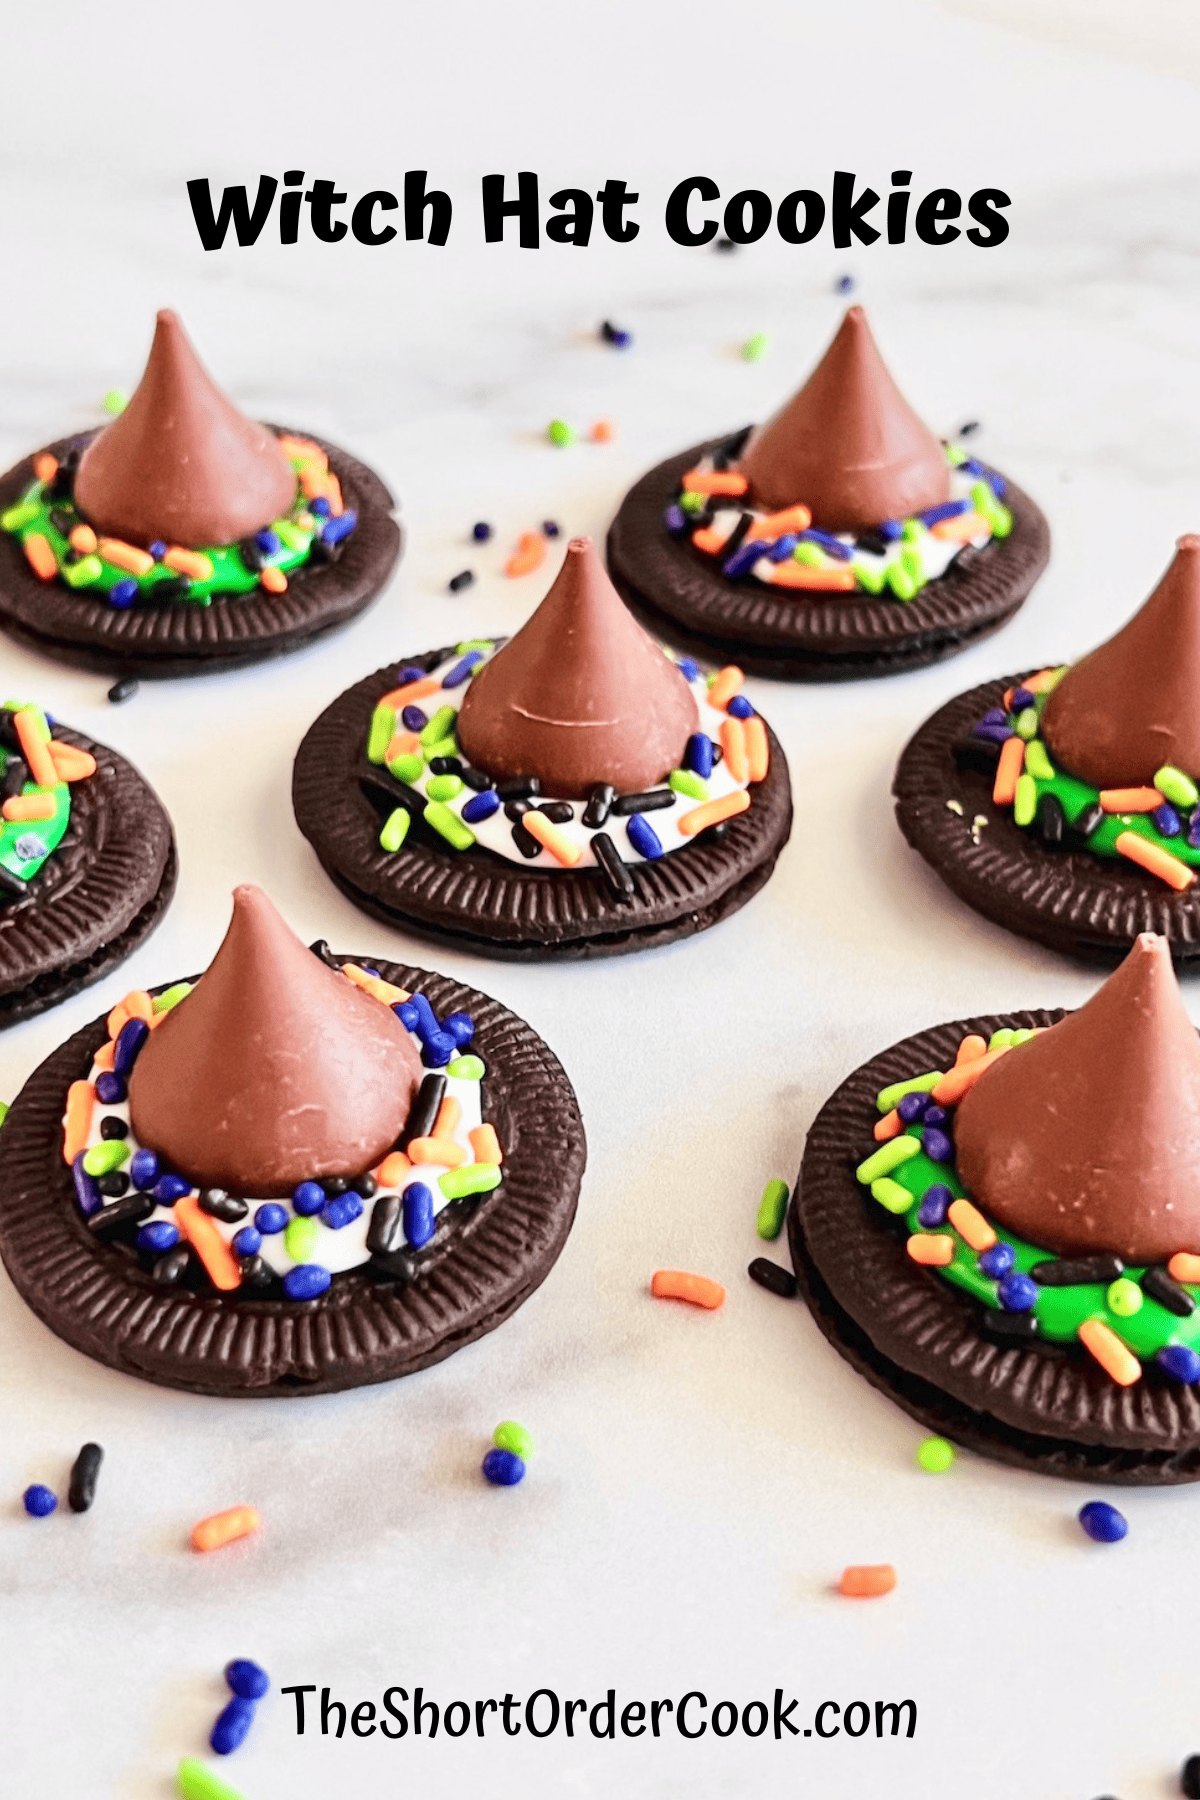 Witch hat cookies made from Oreo thins and hershey kisses.